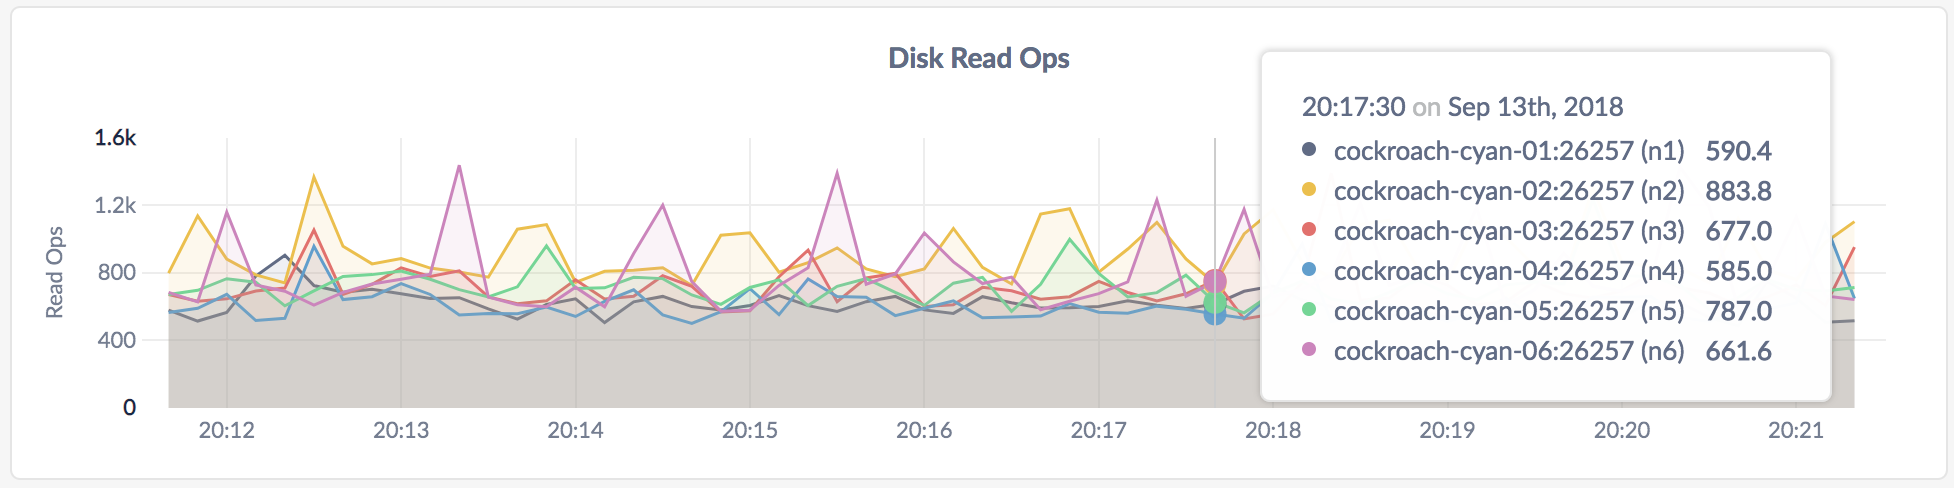 DB Console Disk Read Ops graph